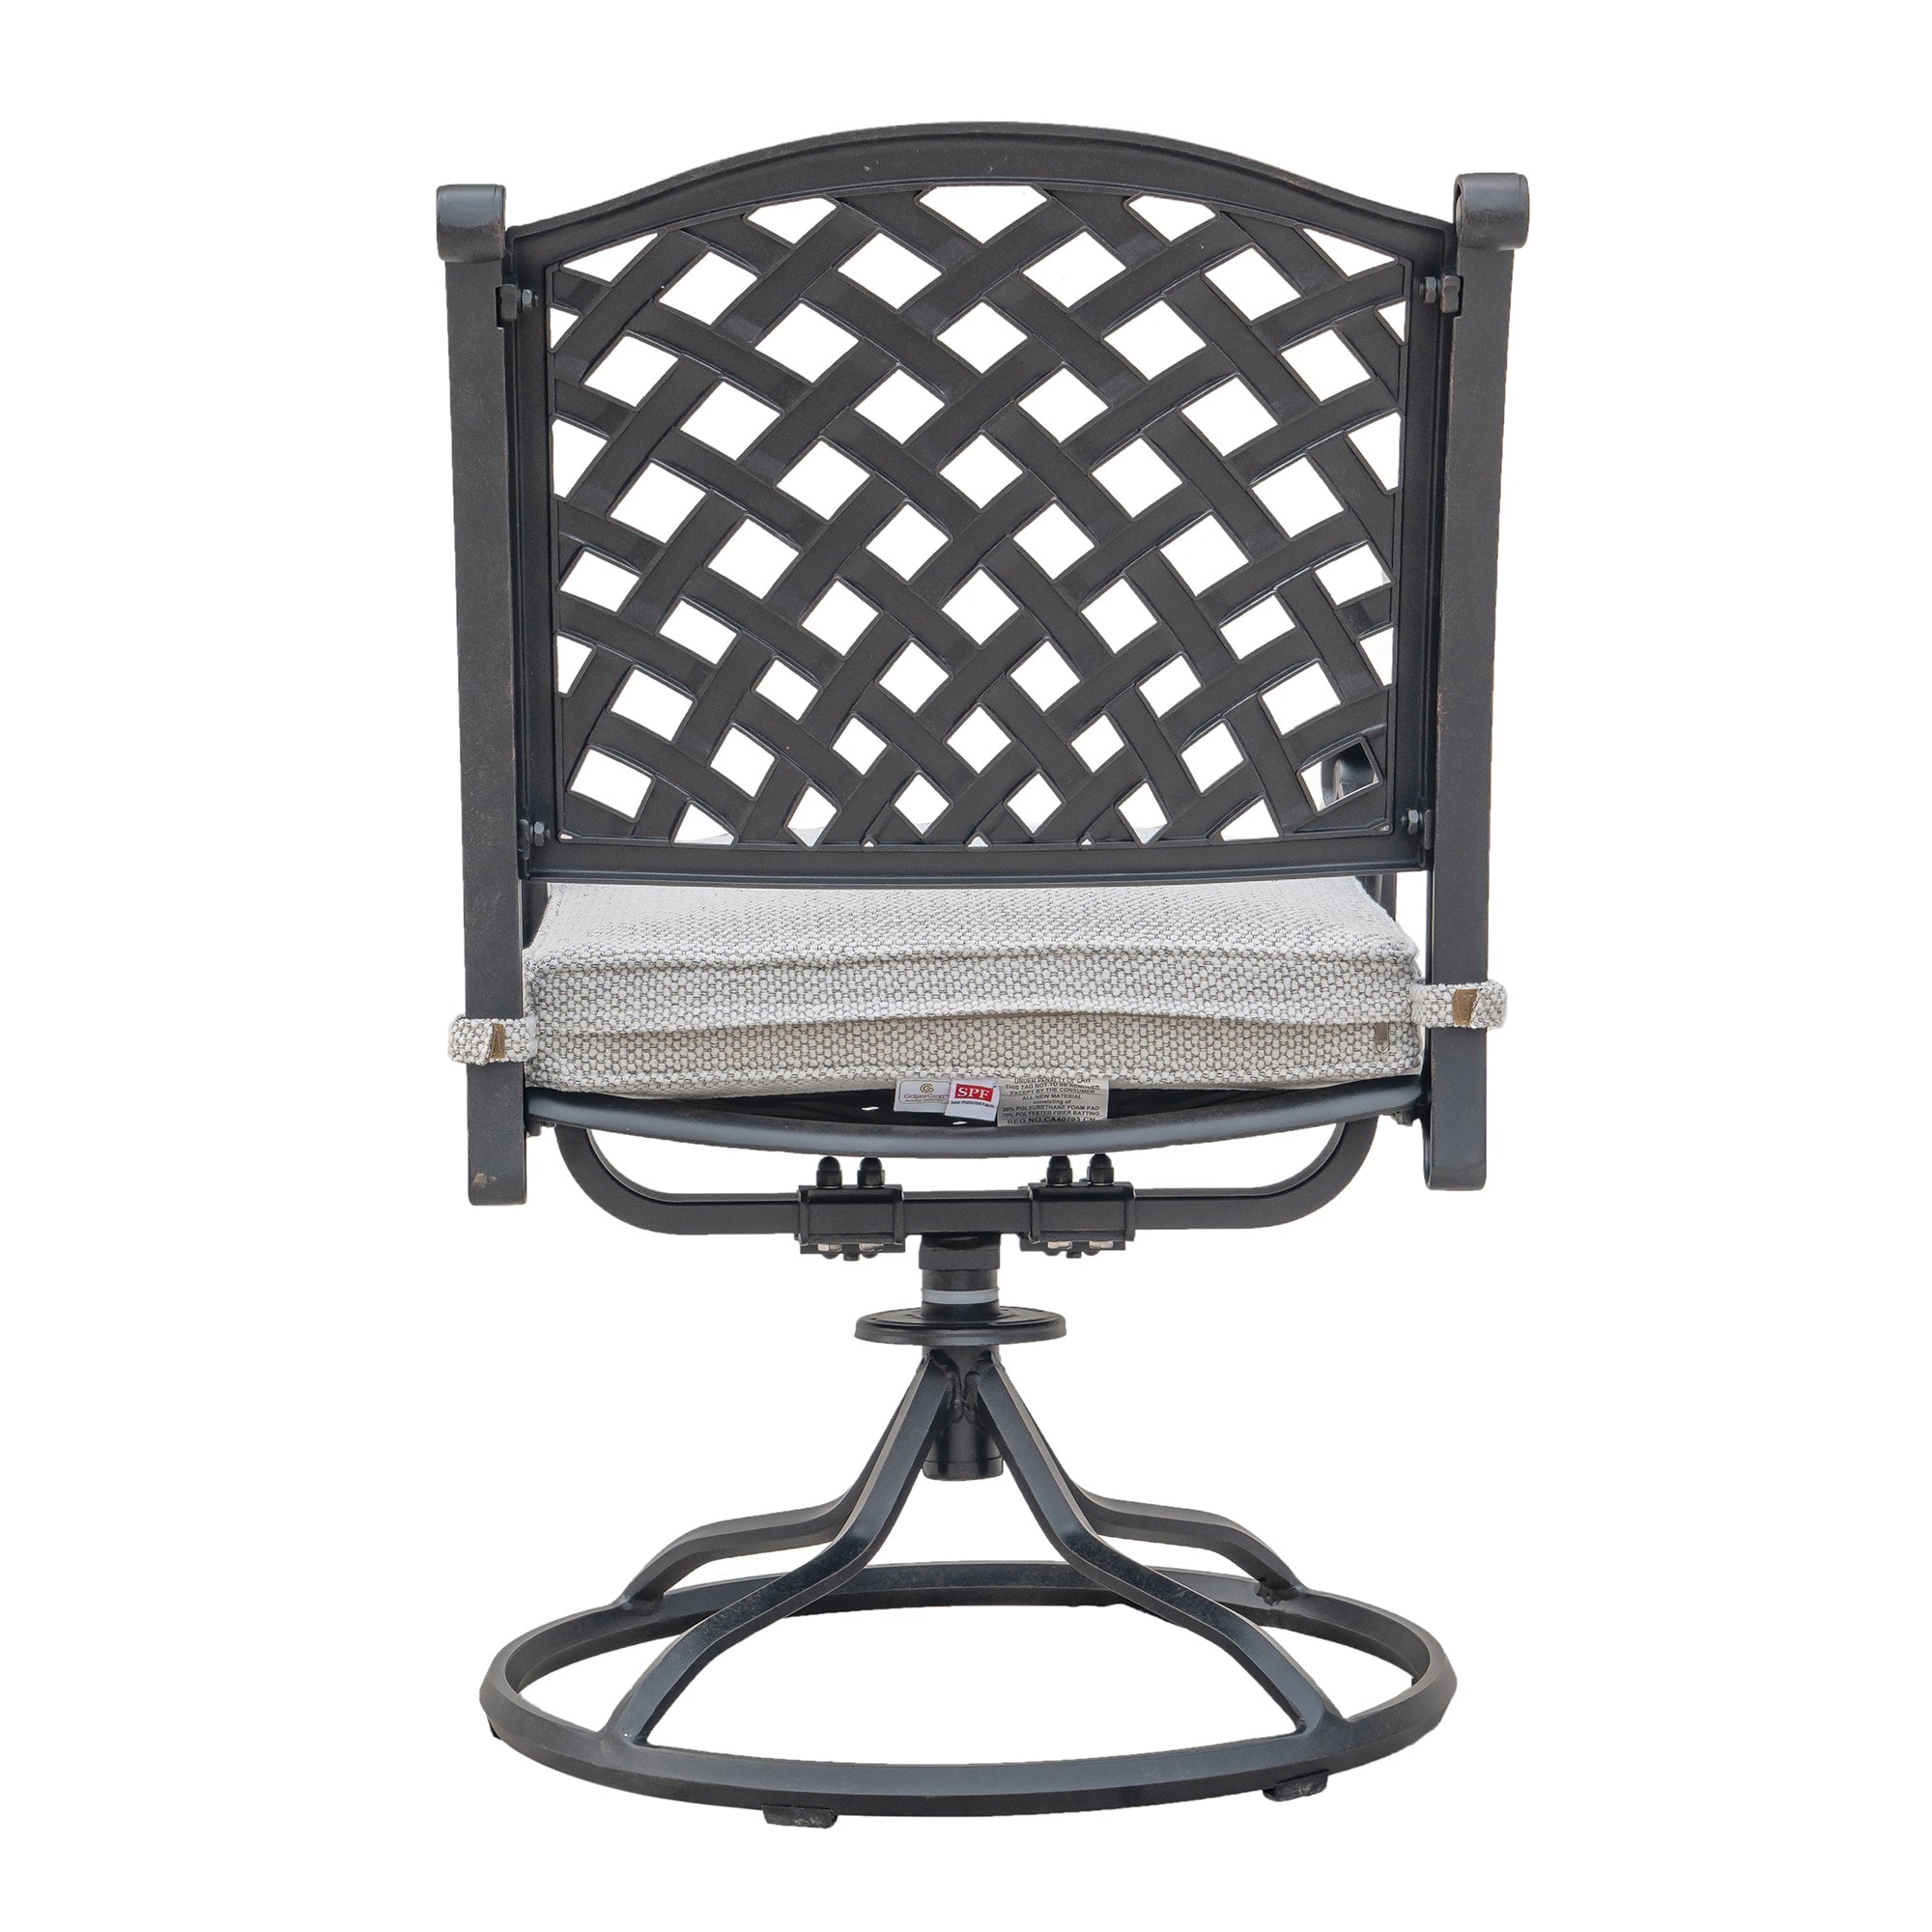 Durable Outdoor Dining Swivel Rockers with